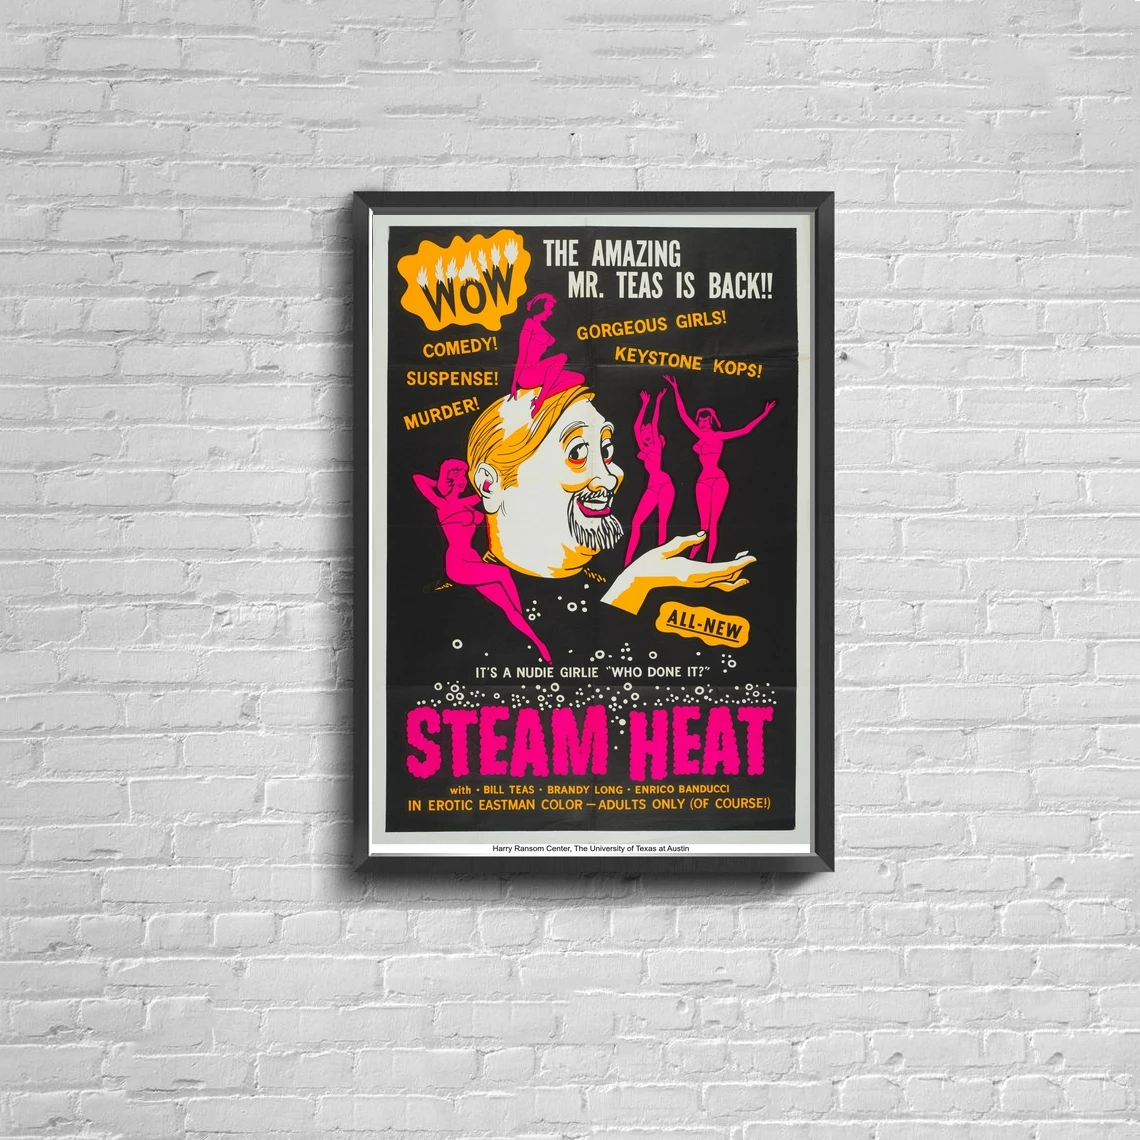 Steam heat for homes фото 52